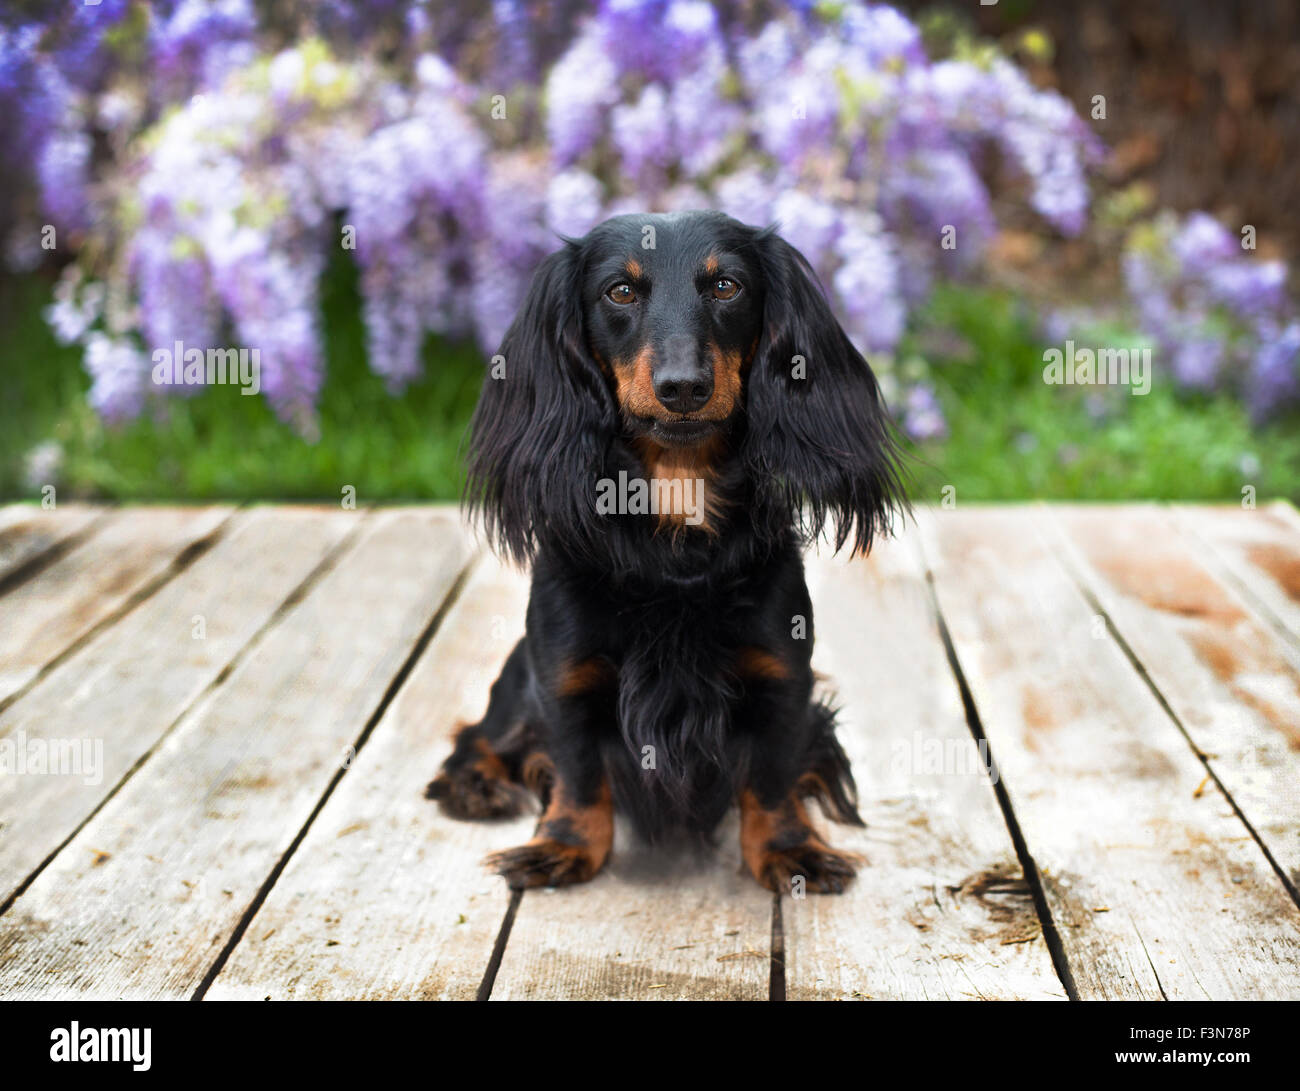 Long haired dachshund dog sitting on wooden boards in front of  purple wisteria vine flowers Stock Photo